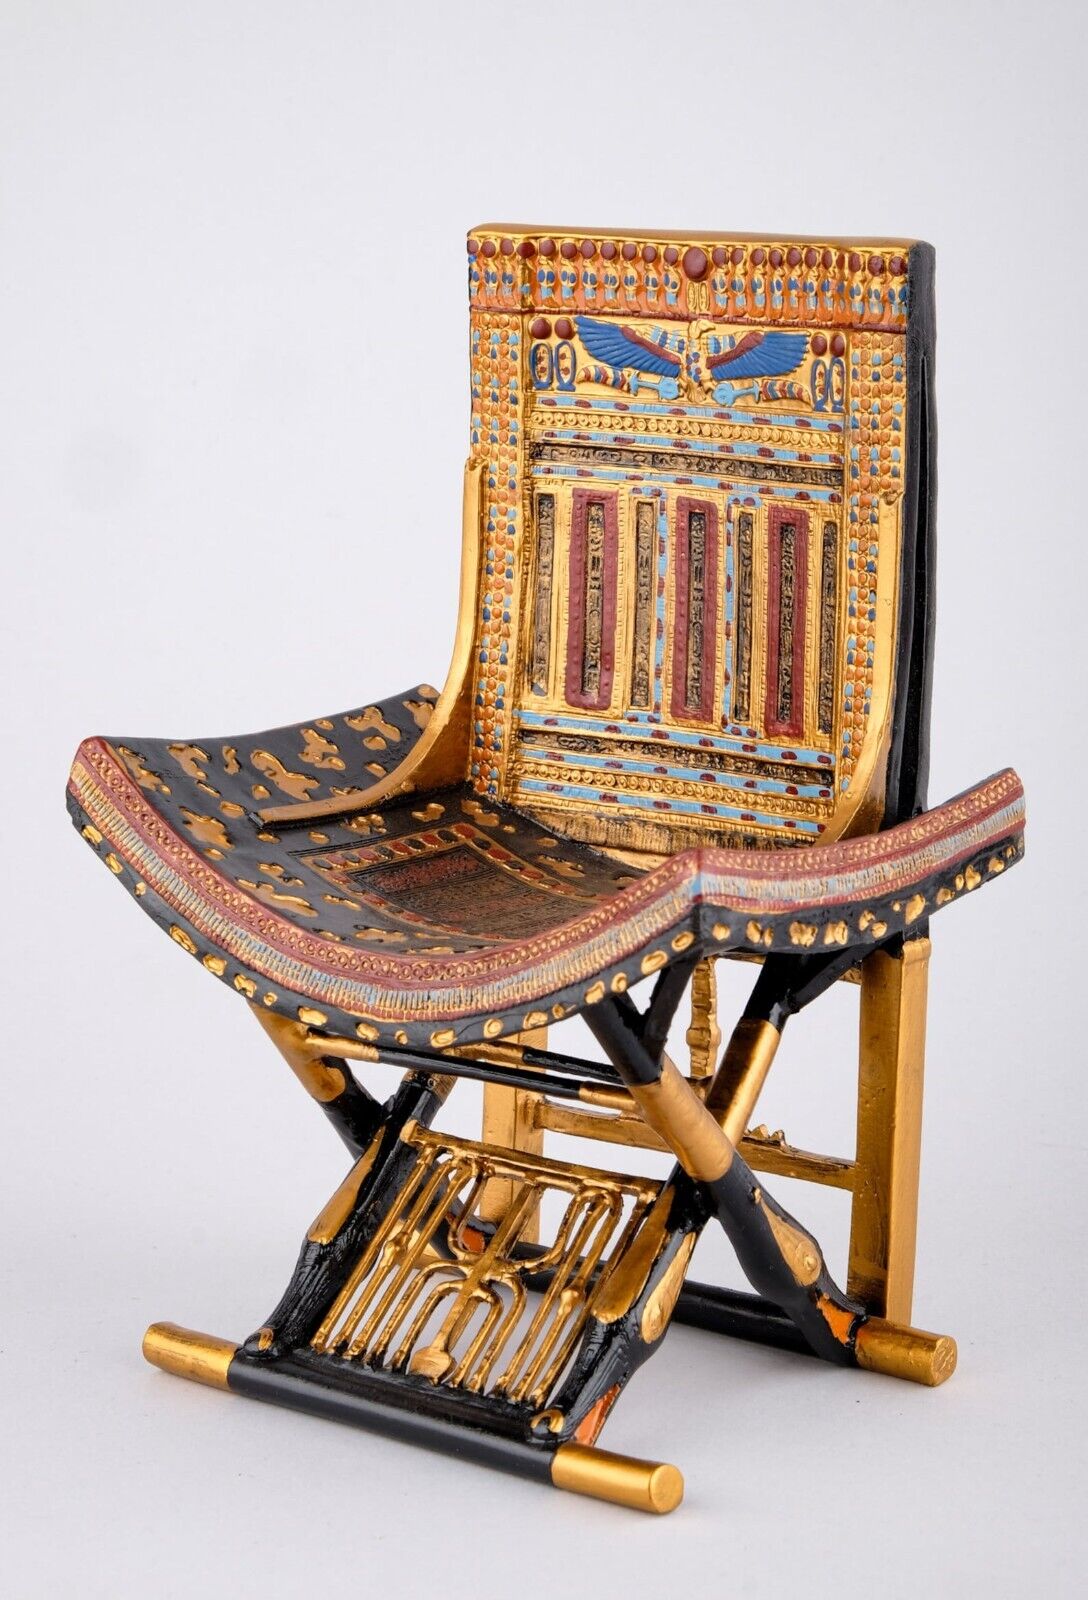 Ceremonial Throne of king Tutankhamun , Handmade Chair with gold painting- Egypt